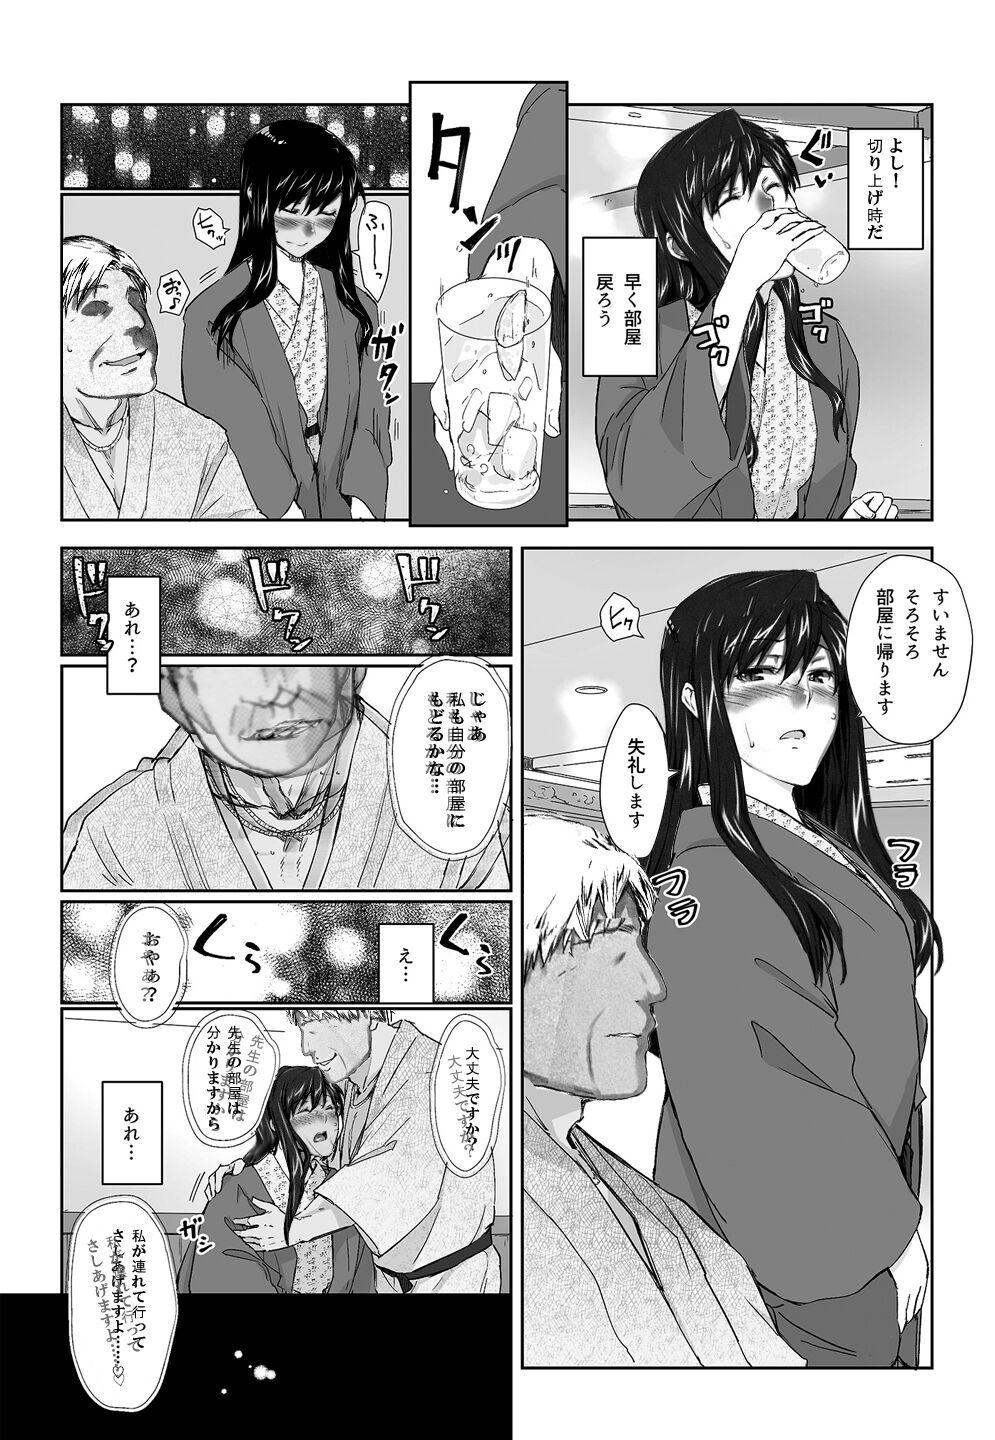 Sakiko-san in delusion Vol.8 ~Sakiko-san's circumstance at an educational training Route3~ (collage) (Continue to “First day of study trip” (page 42) of Vol.1) 4